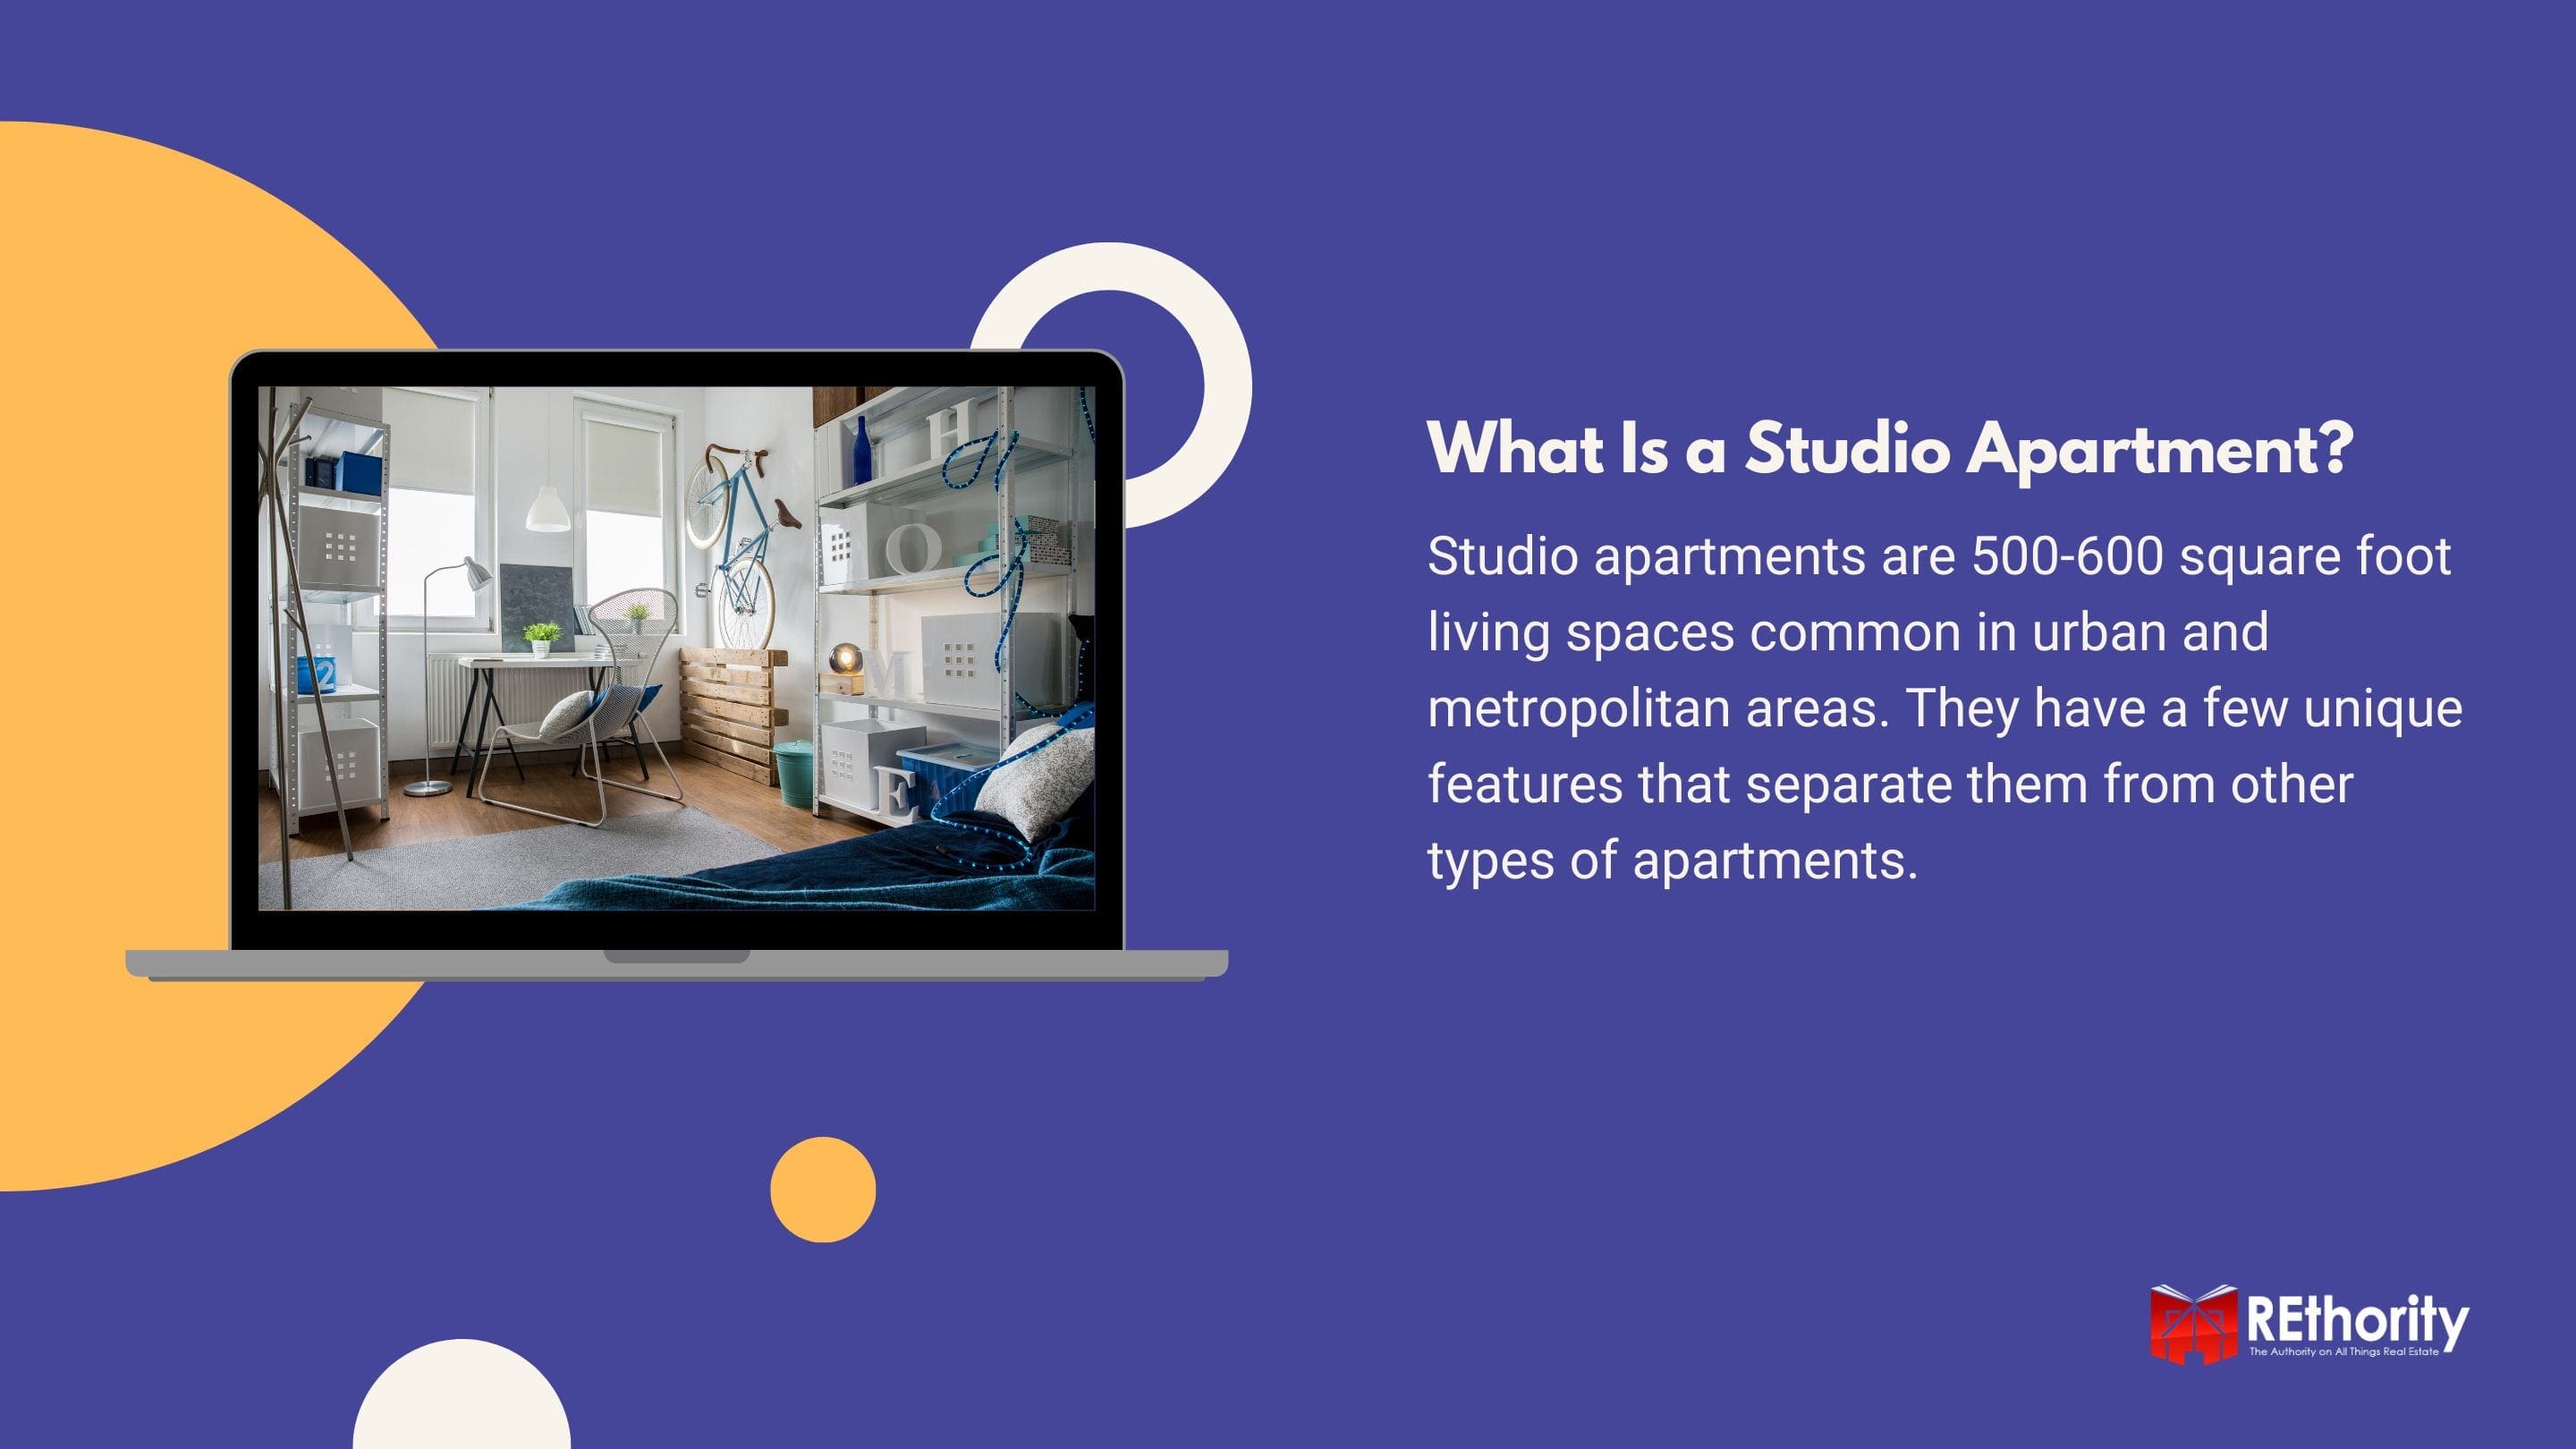 What Is a Studio Apartment graphic against blue background and an image of a studio apartment displayed on a silver laptop